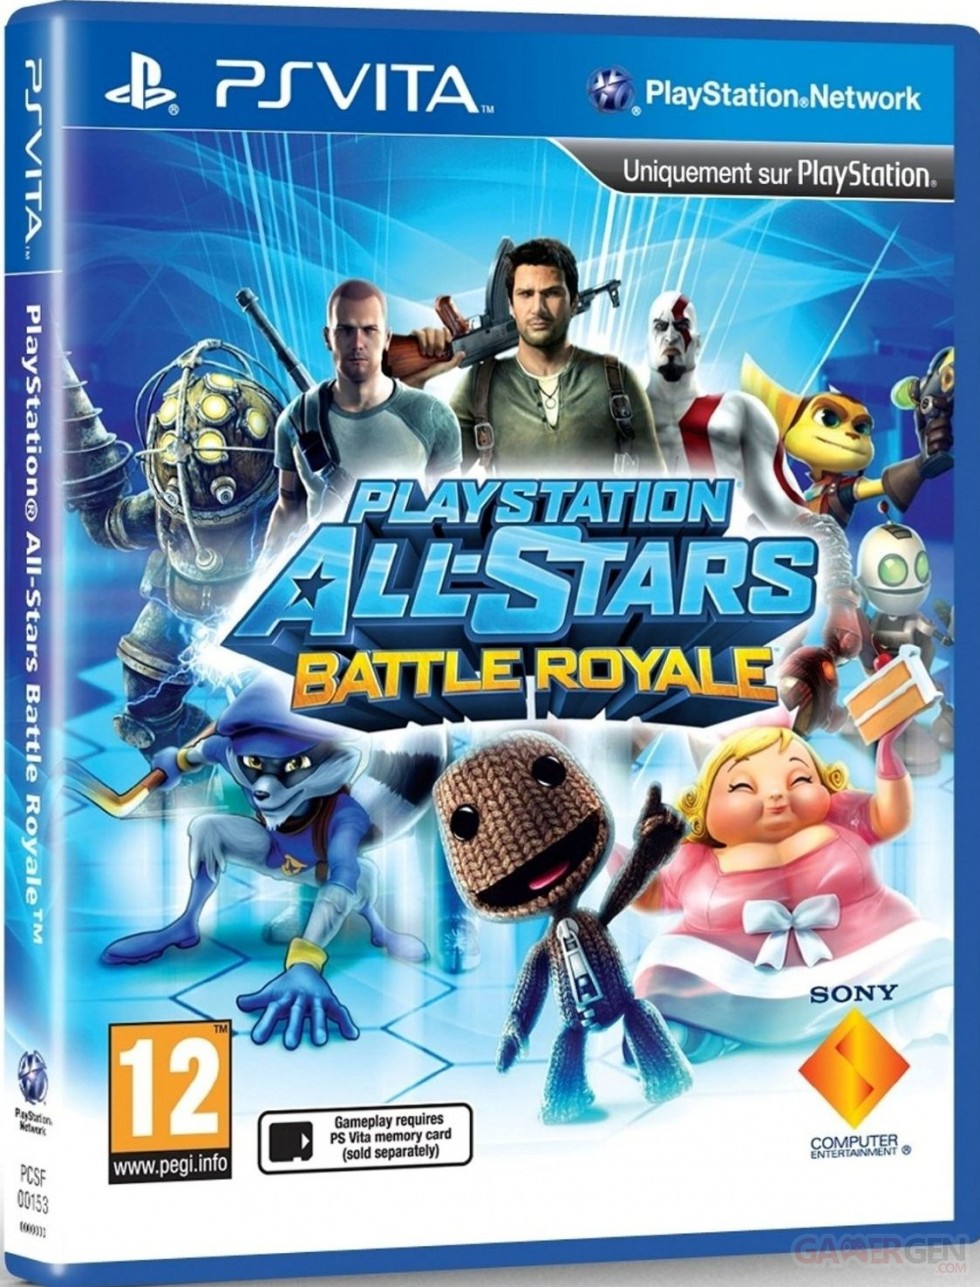 PlayStaion All Stars Battle Royale jaquette cover 31.10.2012